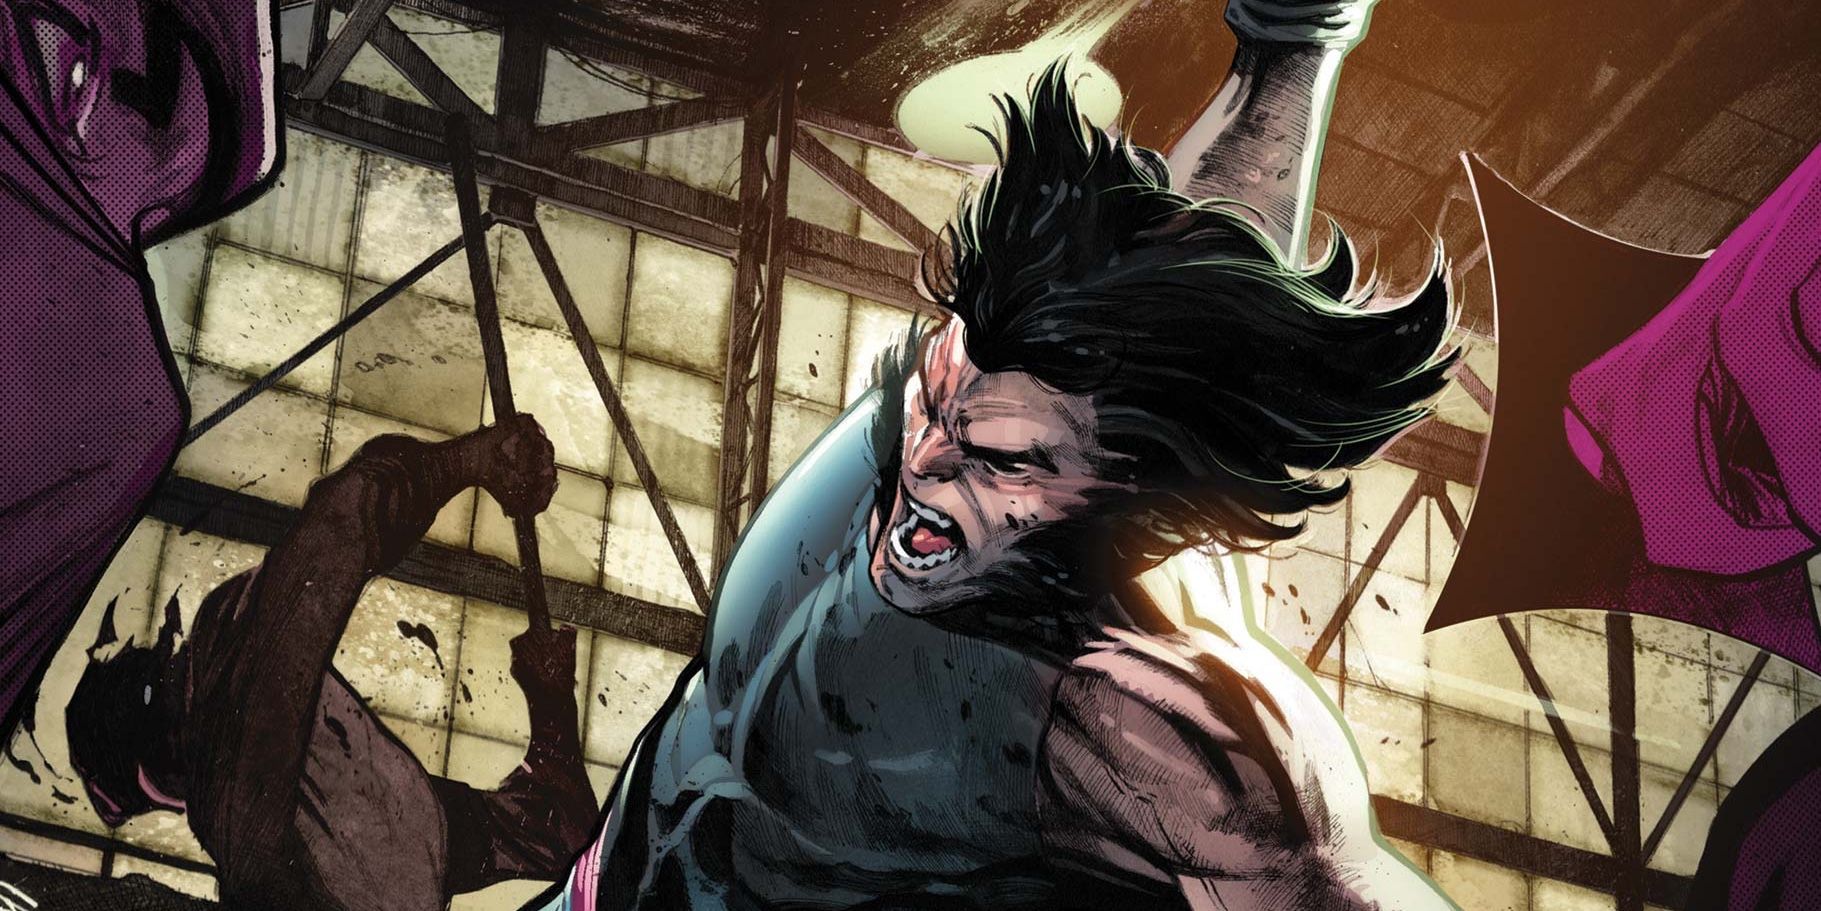 Wolverine fights Ninjas in variant cover for X Lives of Wolverine #5